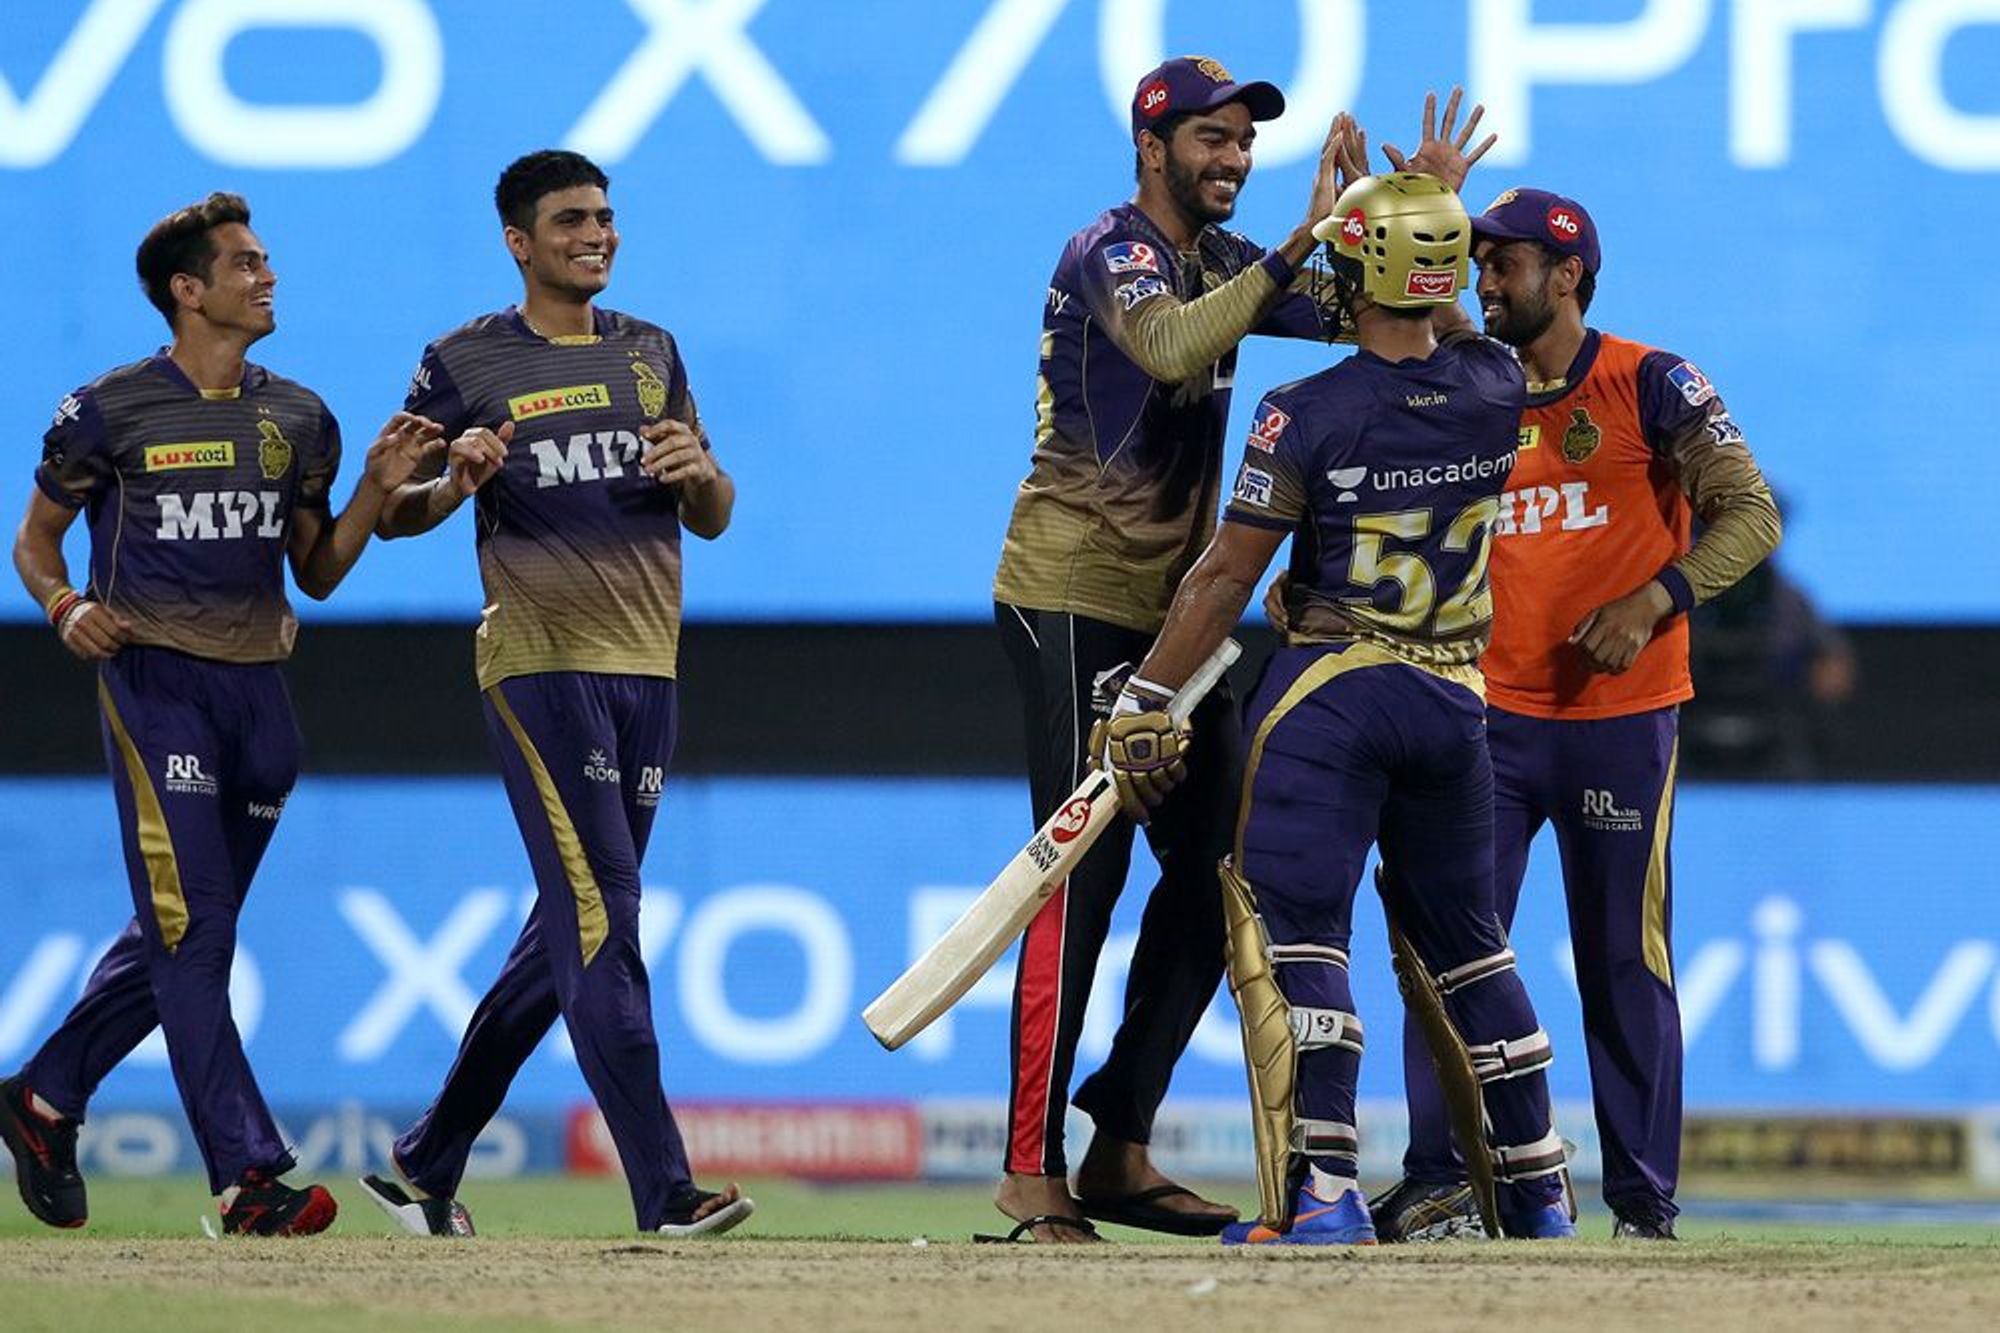 KKR made it to the final of IPL 2021 with a thrilling win over DC | BCCI/IPL